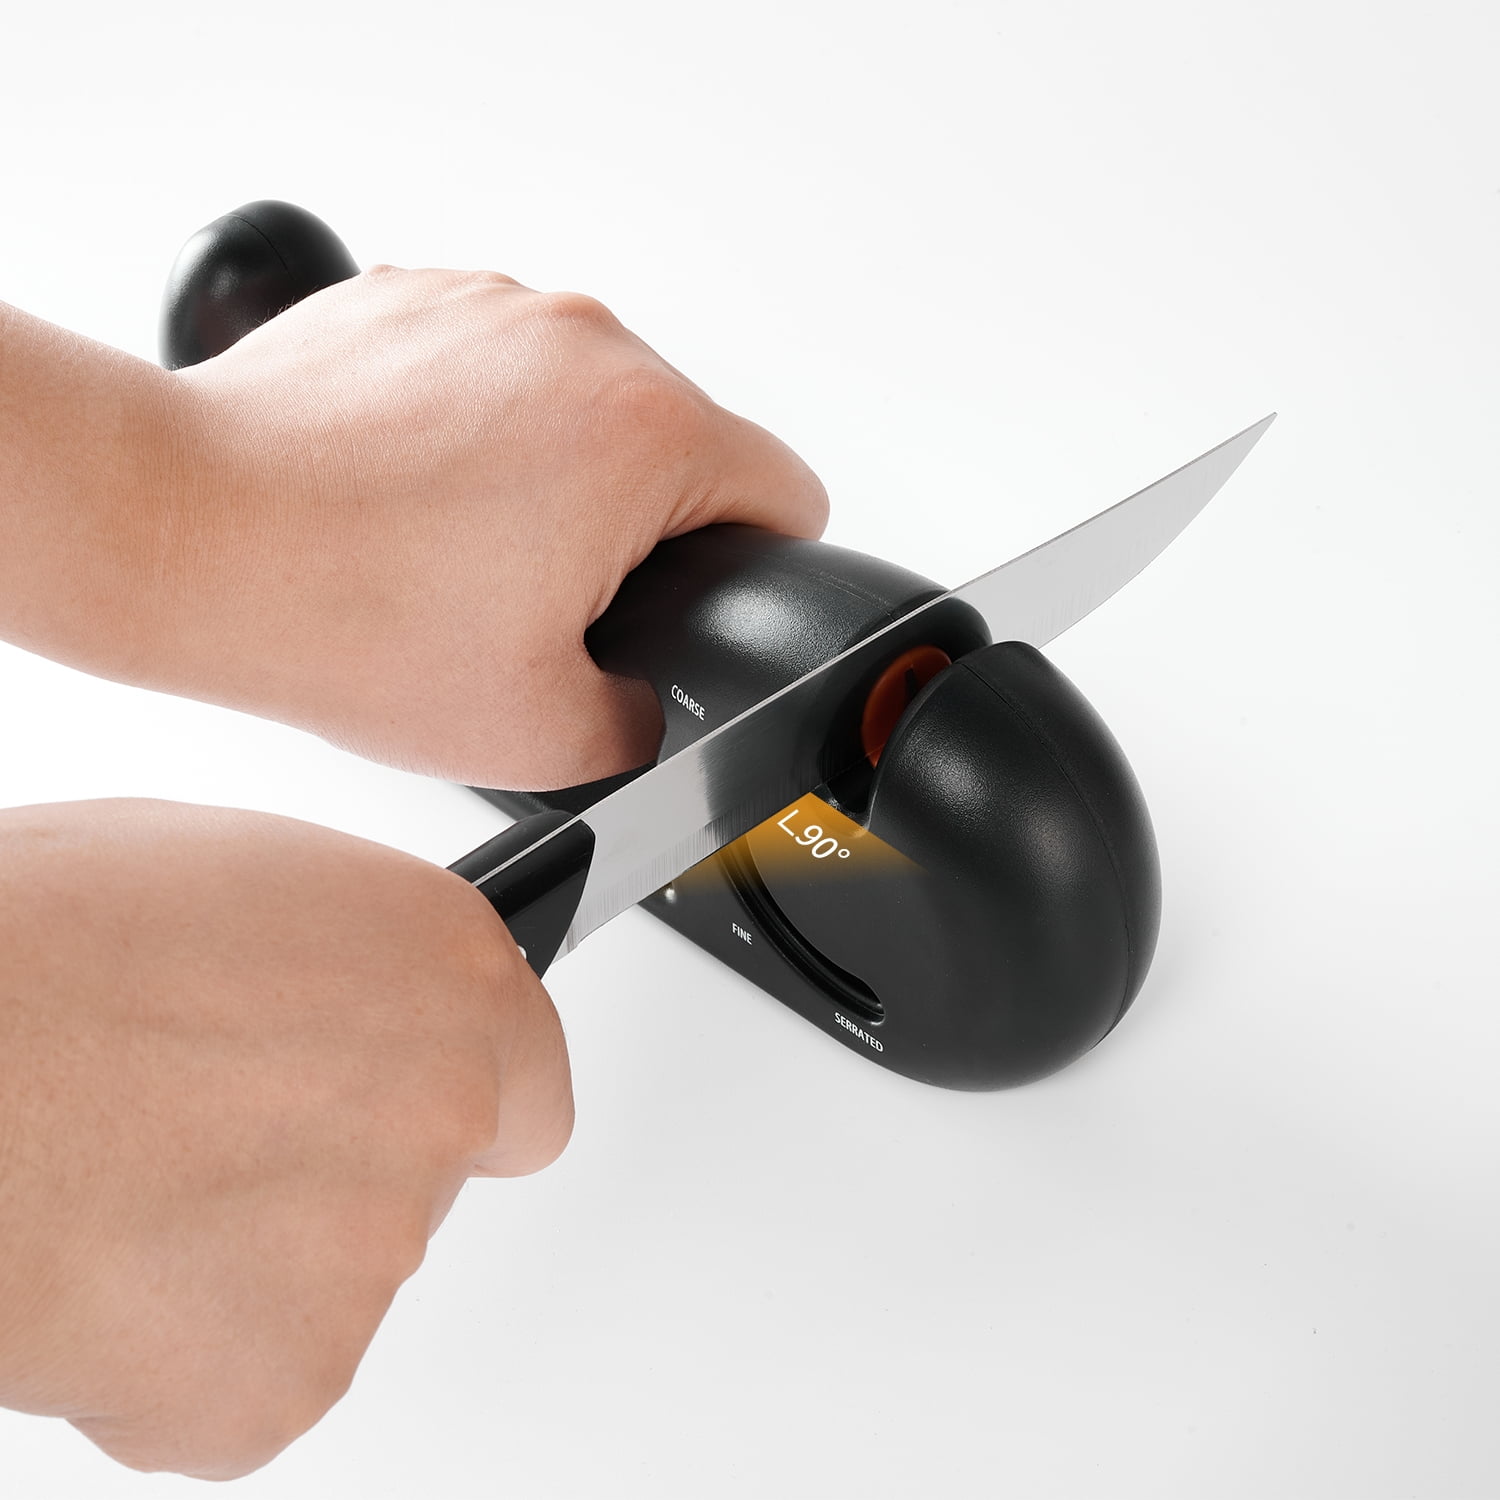 Knife & Scissors Sharpener with Suction Cup - Sharpal Inc.